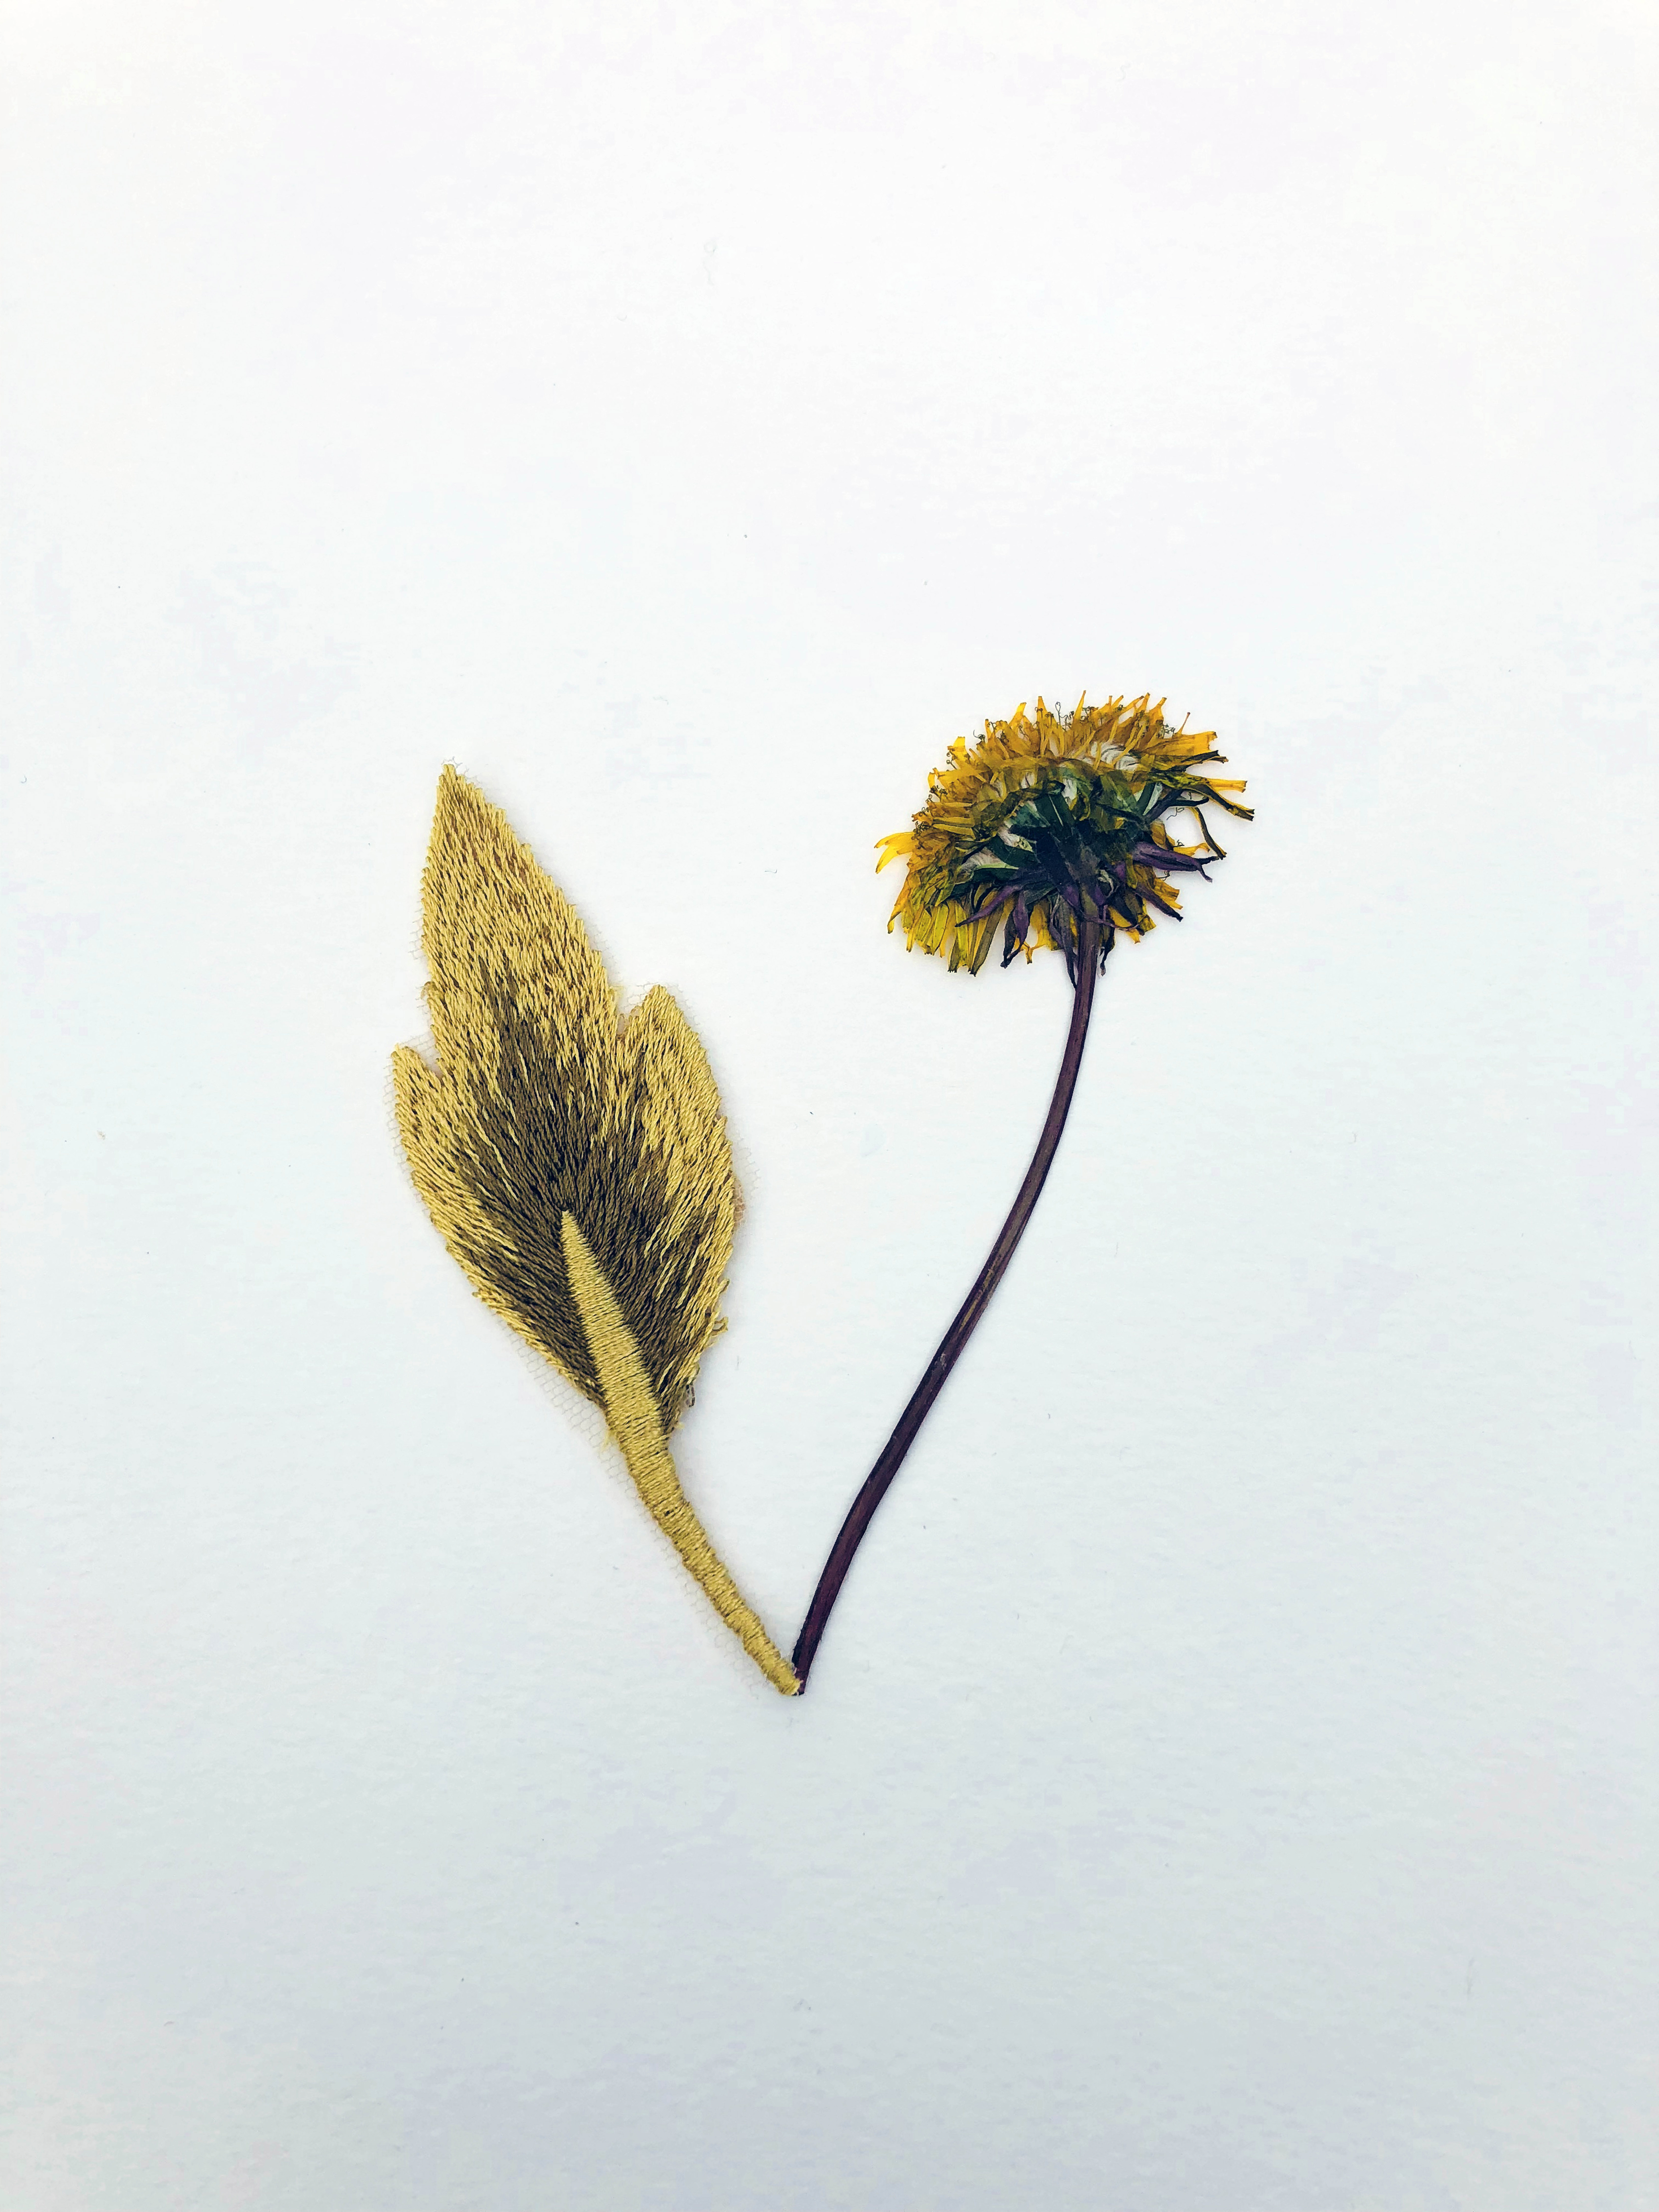 Jil Weinstock, Unwanted Collaborator (yellow, beige, brown and yellow flower), 2020, Plant life, thread, adhesive and rag paper, 10 x 8 1/2 inches